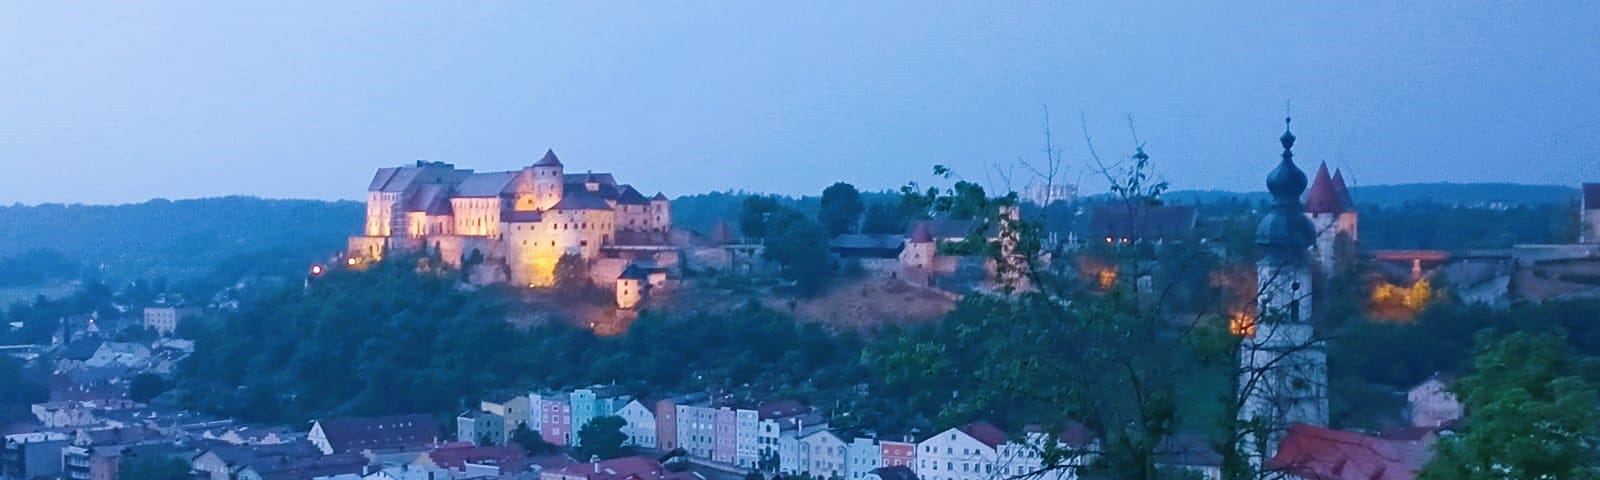 A town beyond the river with a lit castle on a hilltop and houses down below.